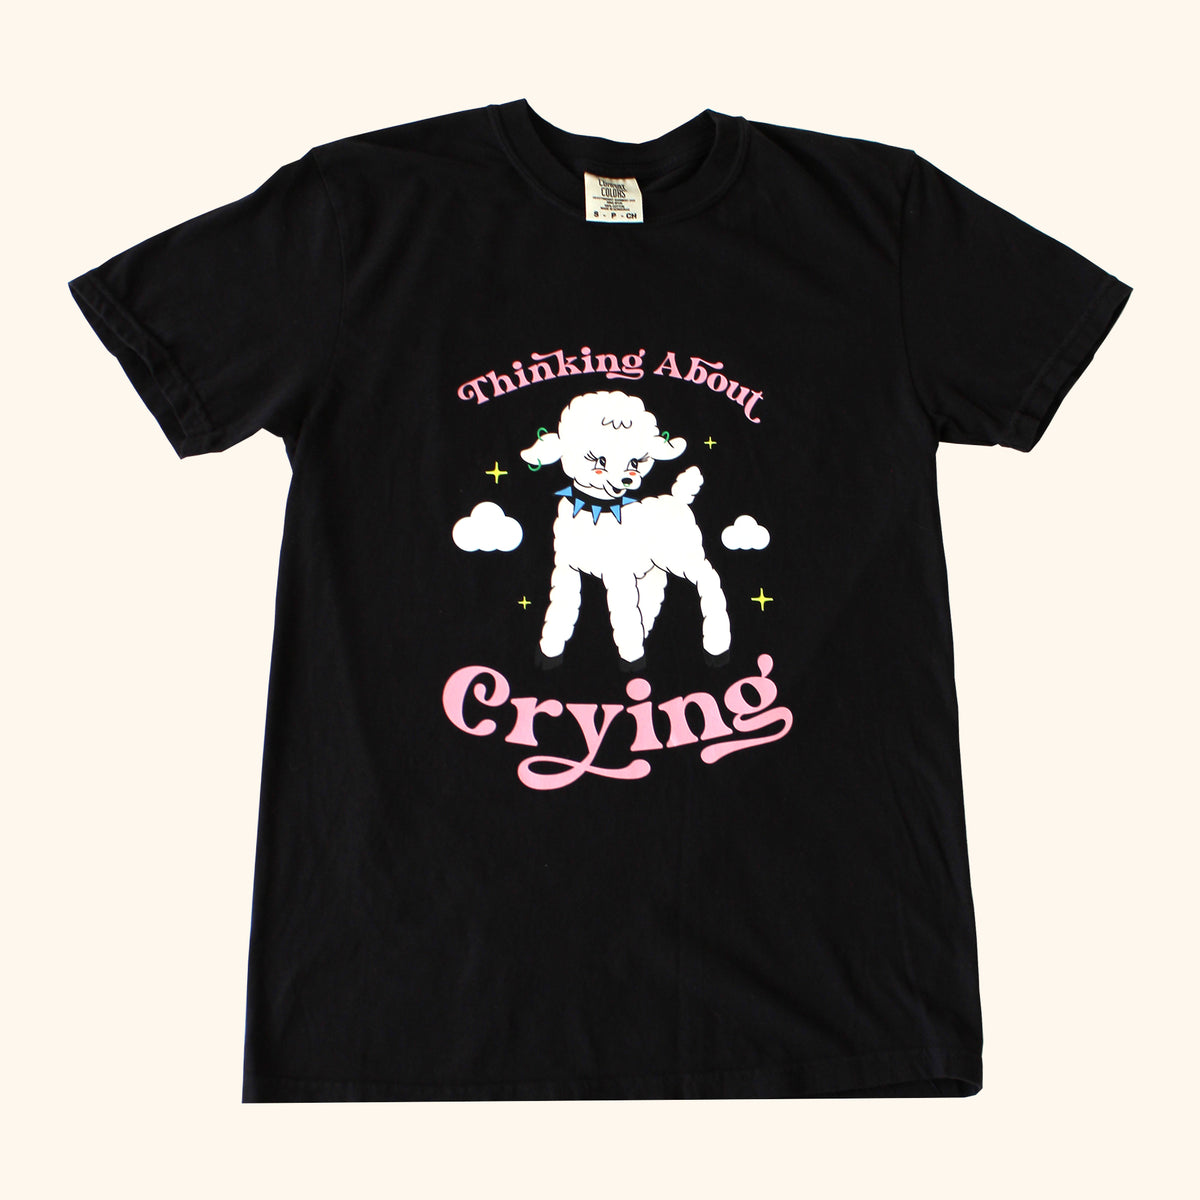 Thinking About Crying | Black T-Shirt + Colorful Front Graphic